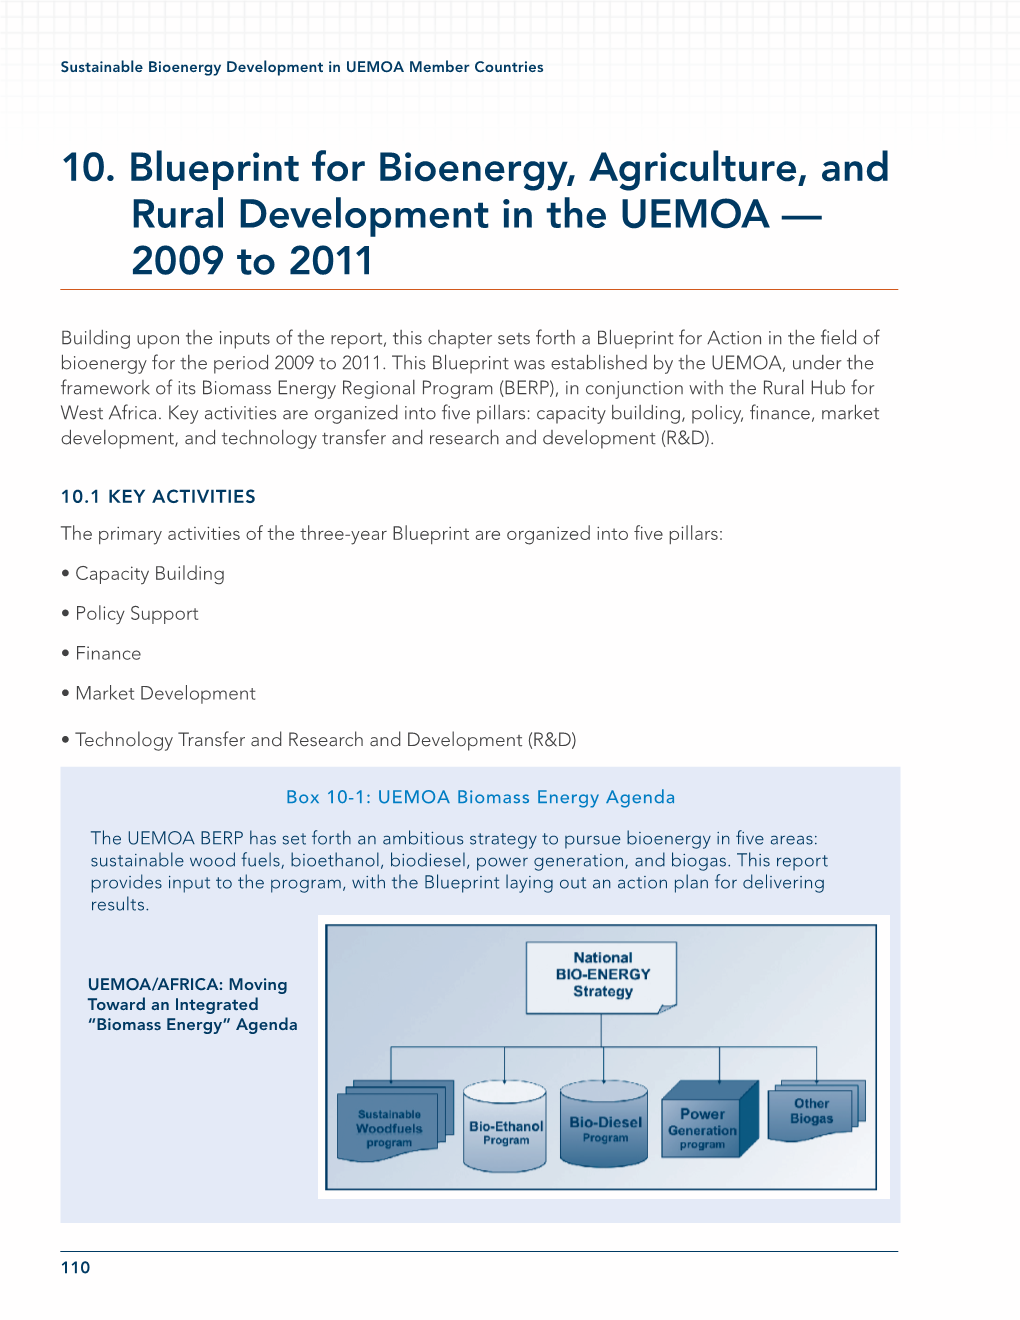 10. Blueprint for Bioenergy, Agriculture, and Rural Development in the UEMOA — 2009 to 2011